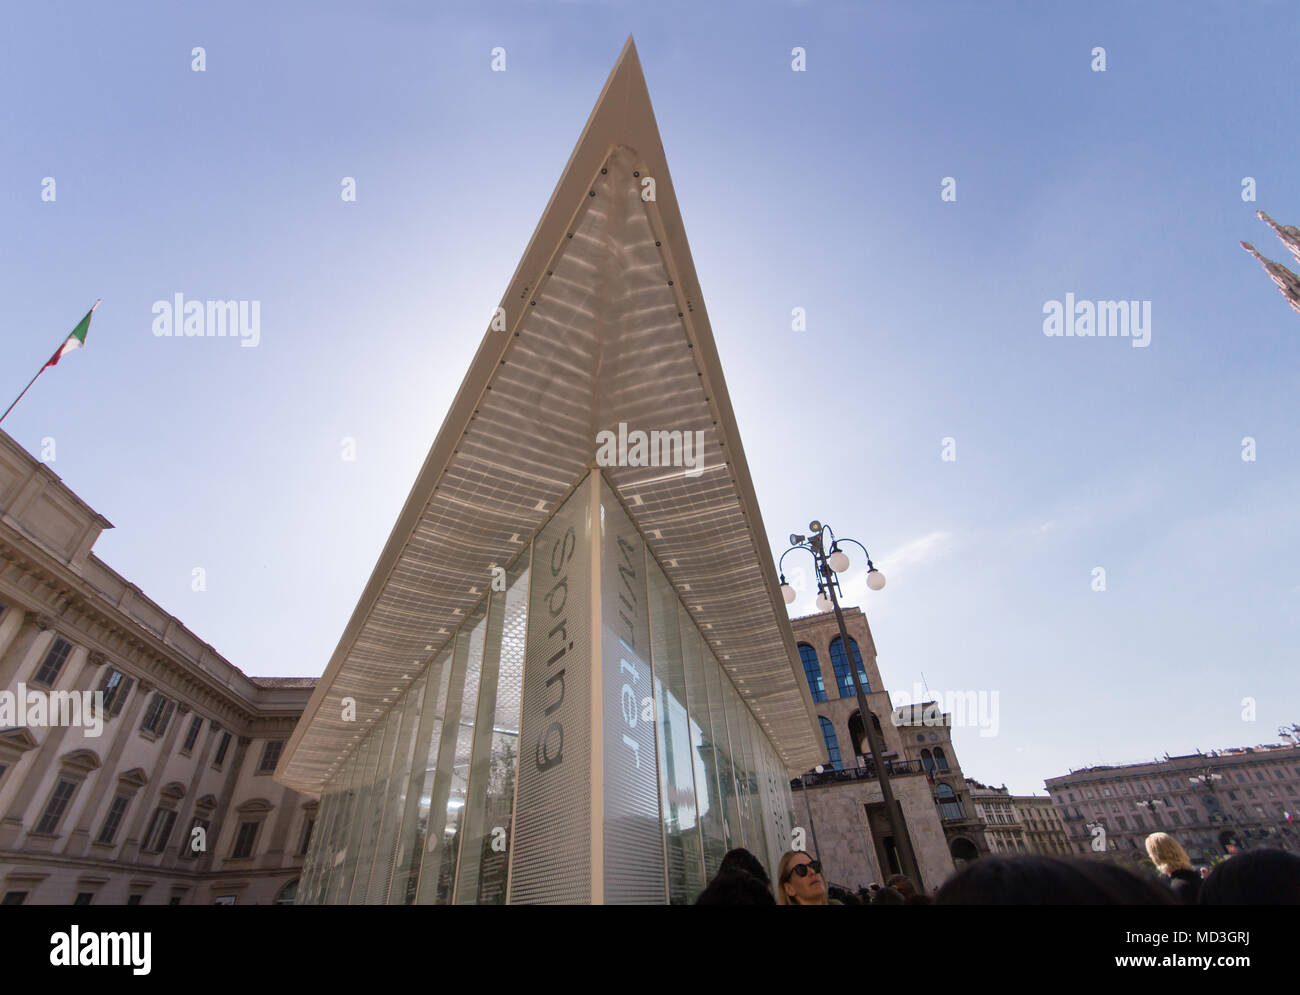 Milan, Italy. 18th April 2018. The LIVING NATURE pavilion by Carlo Ratti Architect installed in Piazza Duomo, Milan, for the 2018 Milan Design Week - Milan Furniture Fair Credit: Riccardo Bianchini/Alamy Live News Stock Photo